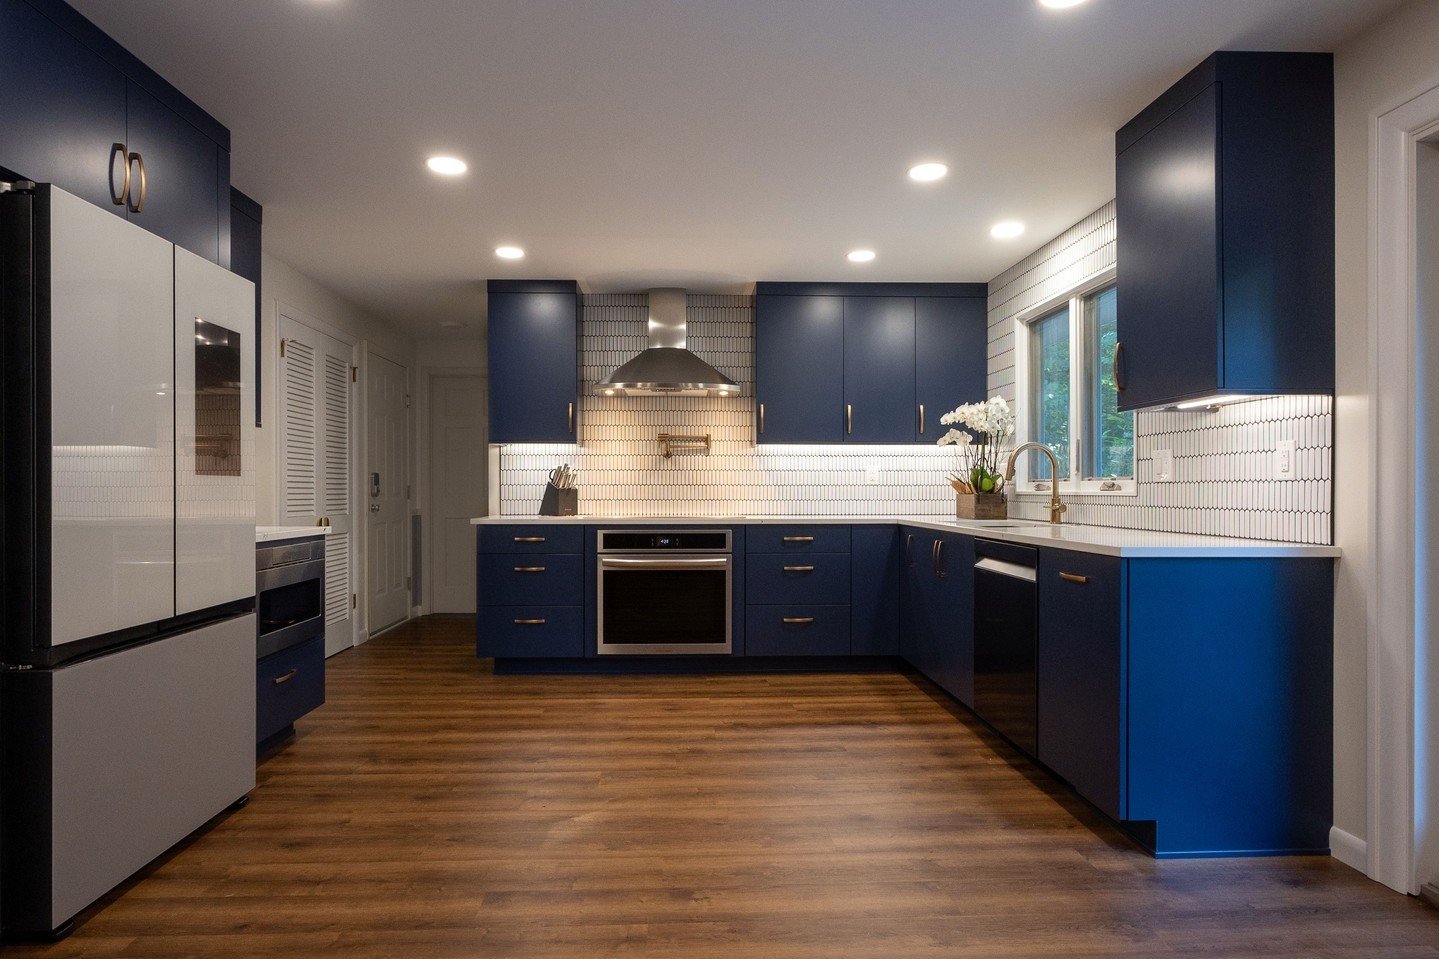 Featuring a bold blue cabinetry that perfectly contrasts with the sleek white countertops and backsplash, this kitchen redefines modern luxury with its clean lines and contemporary finishes.

#rennovation
#remodel
#kitchendesign
#kitchenremodel
#kitc